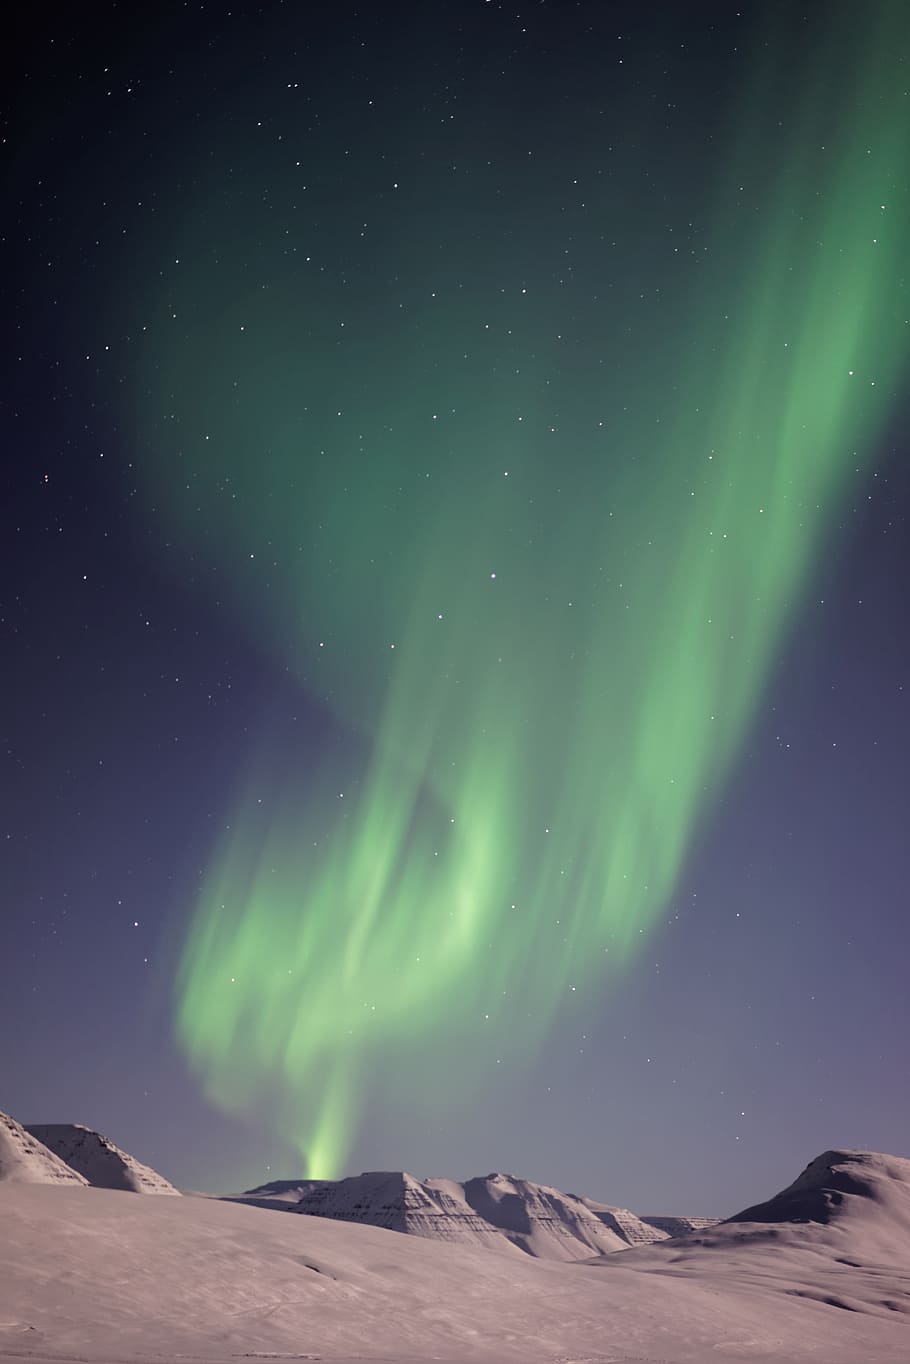 aurora, green, sky, nature, highland, landscape, scenics - nature, beauty in nature, space, astronomy